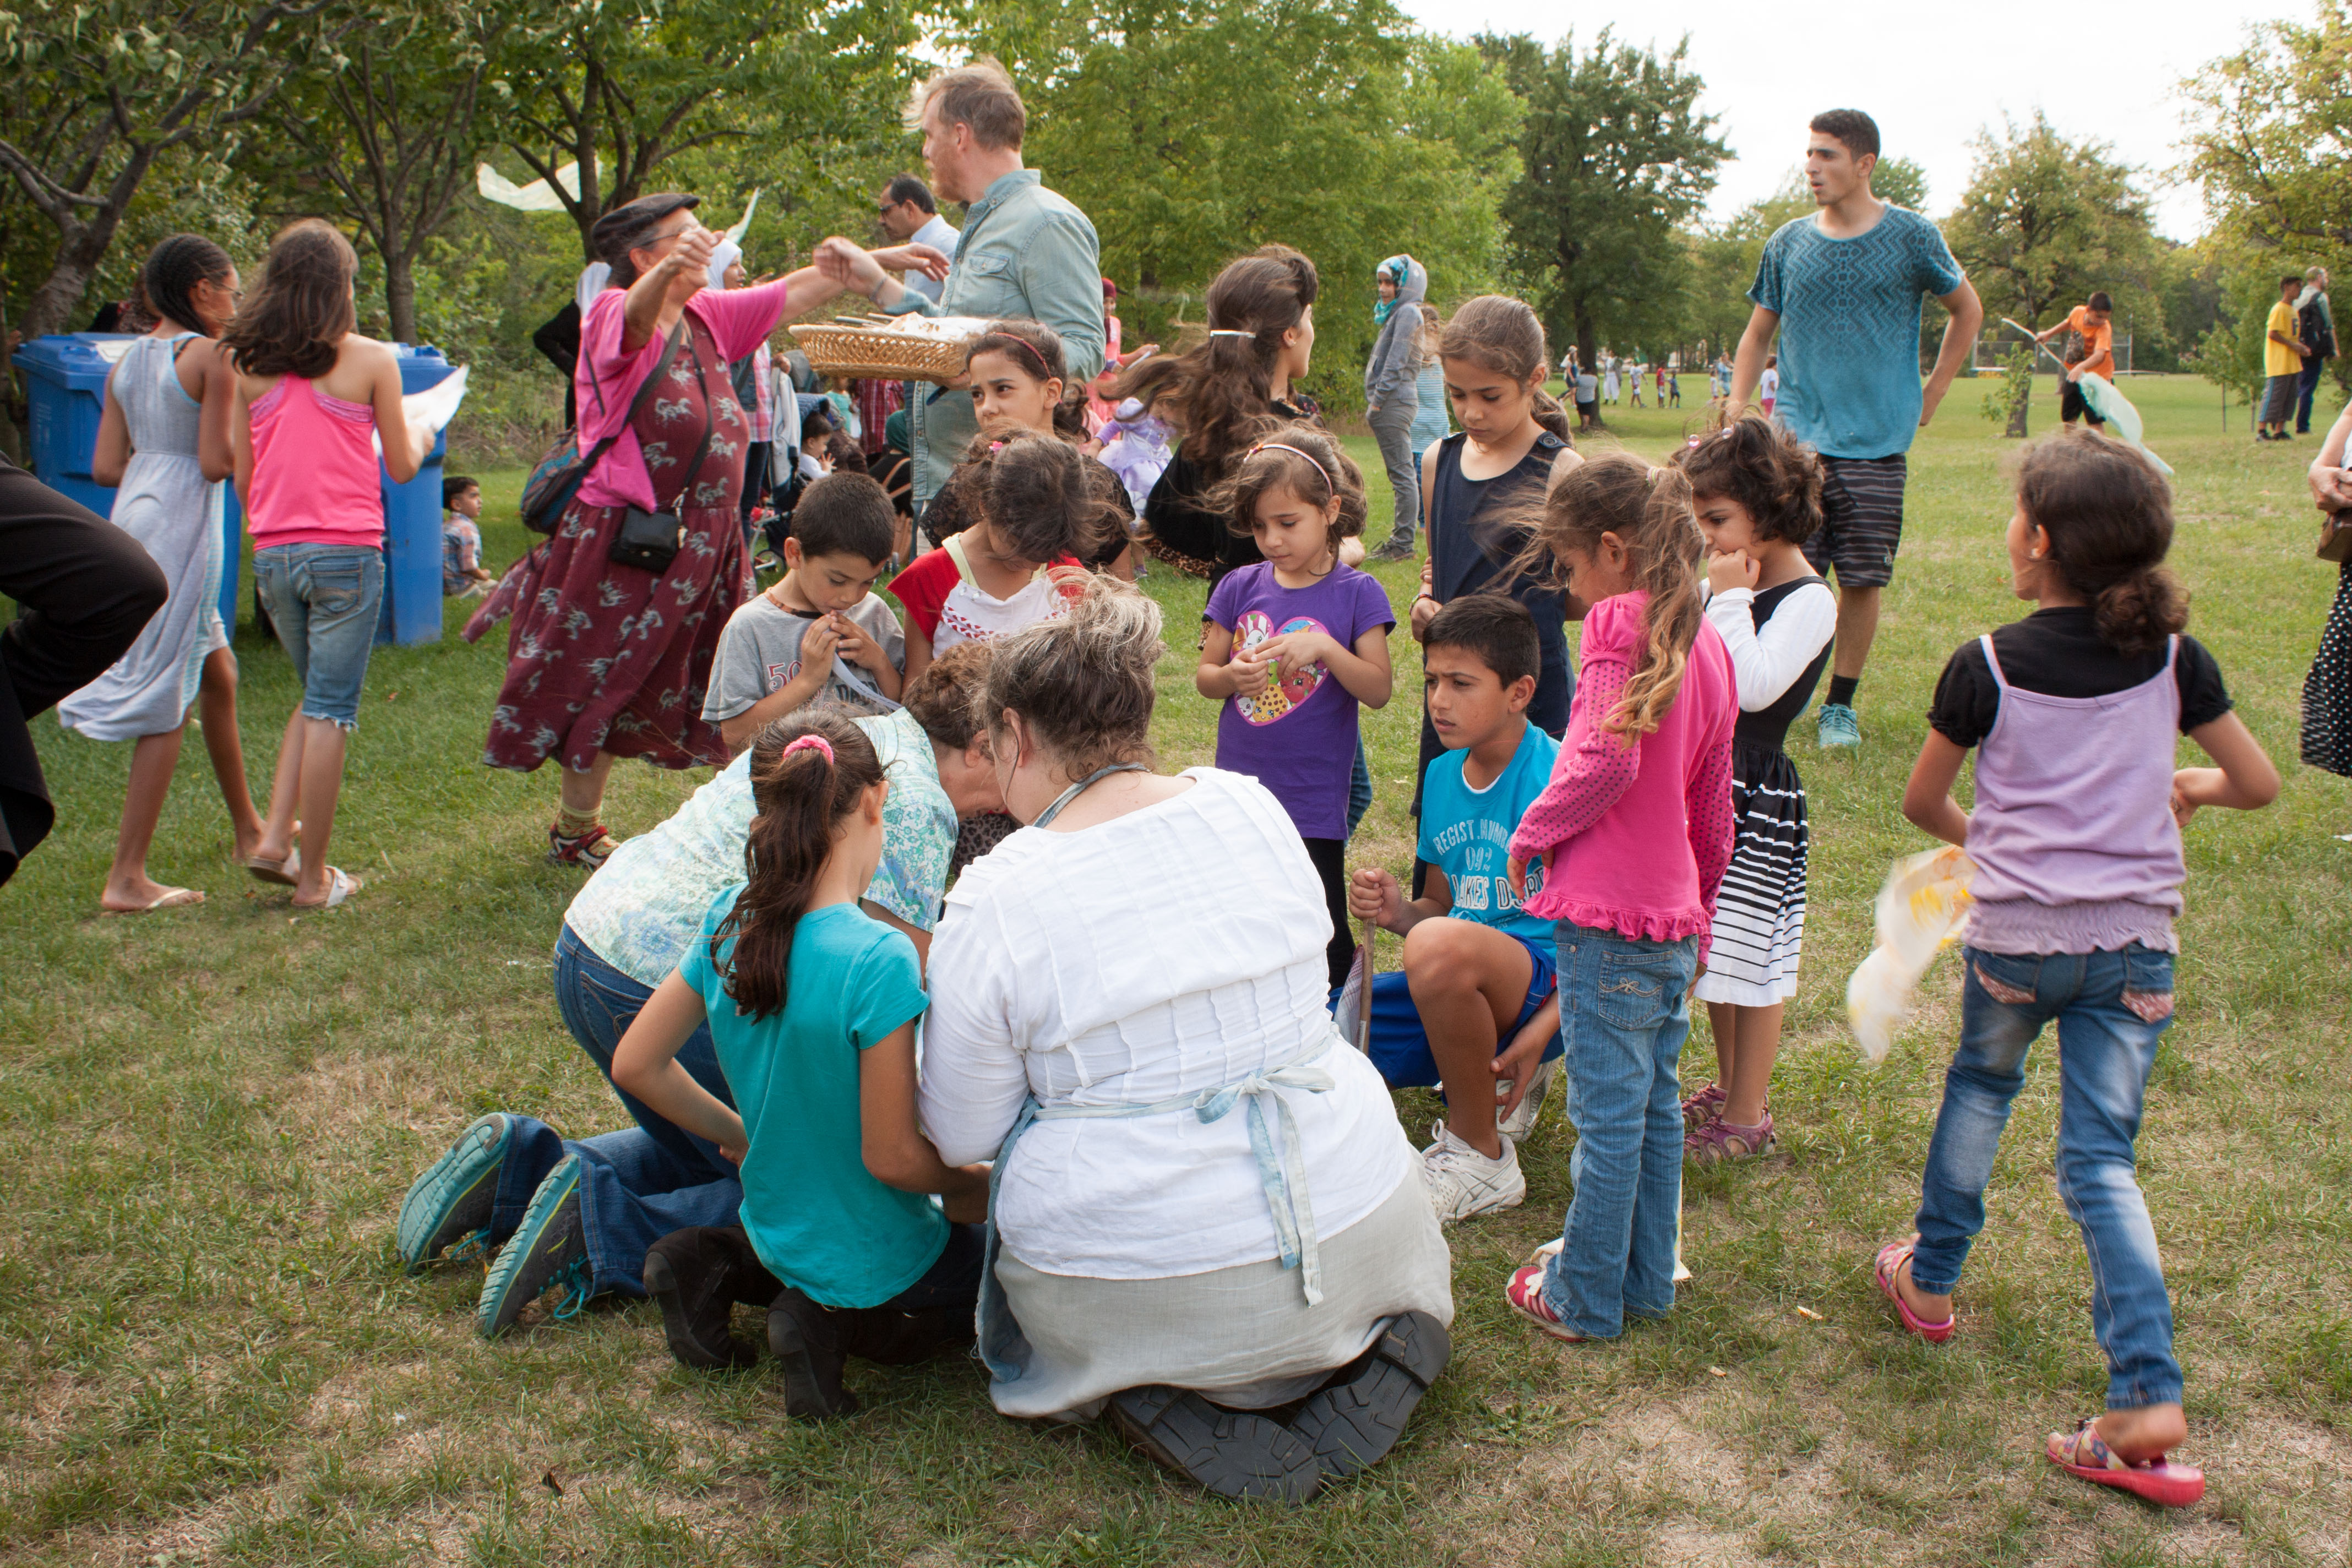 An adult sits on the grass and is surrounded by a group of children looking on.